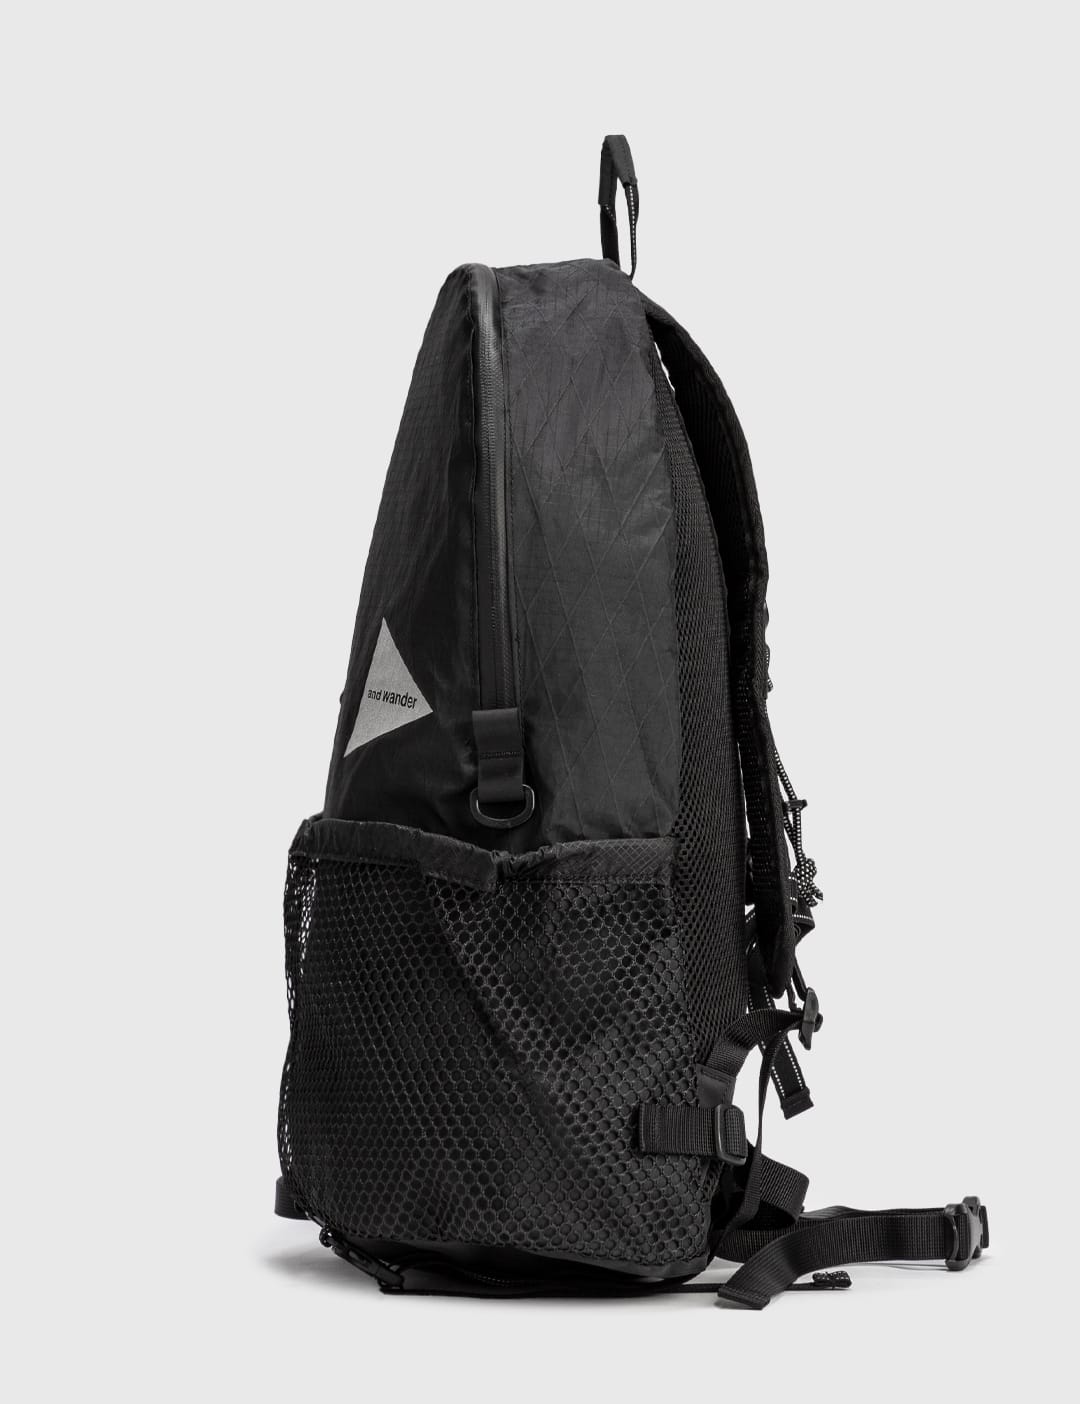 and Wander - X-Pac 20L Daypack | HBX - Globally Curated Fashion 